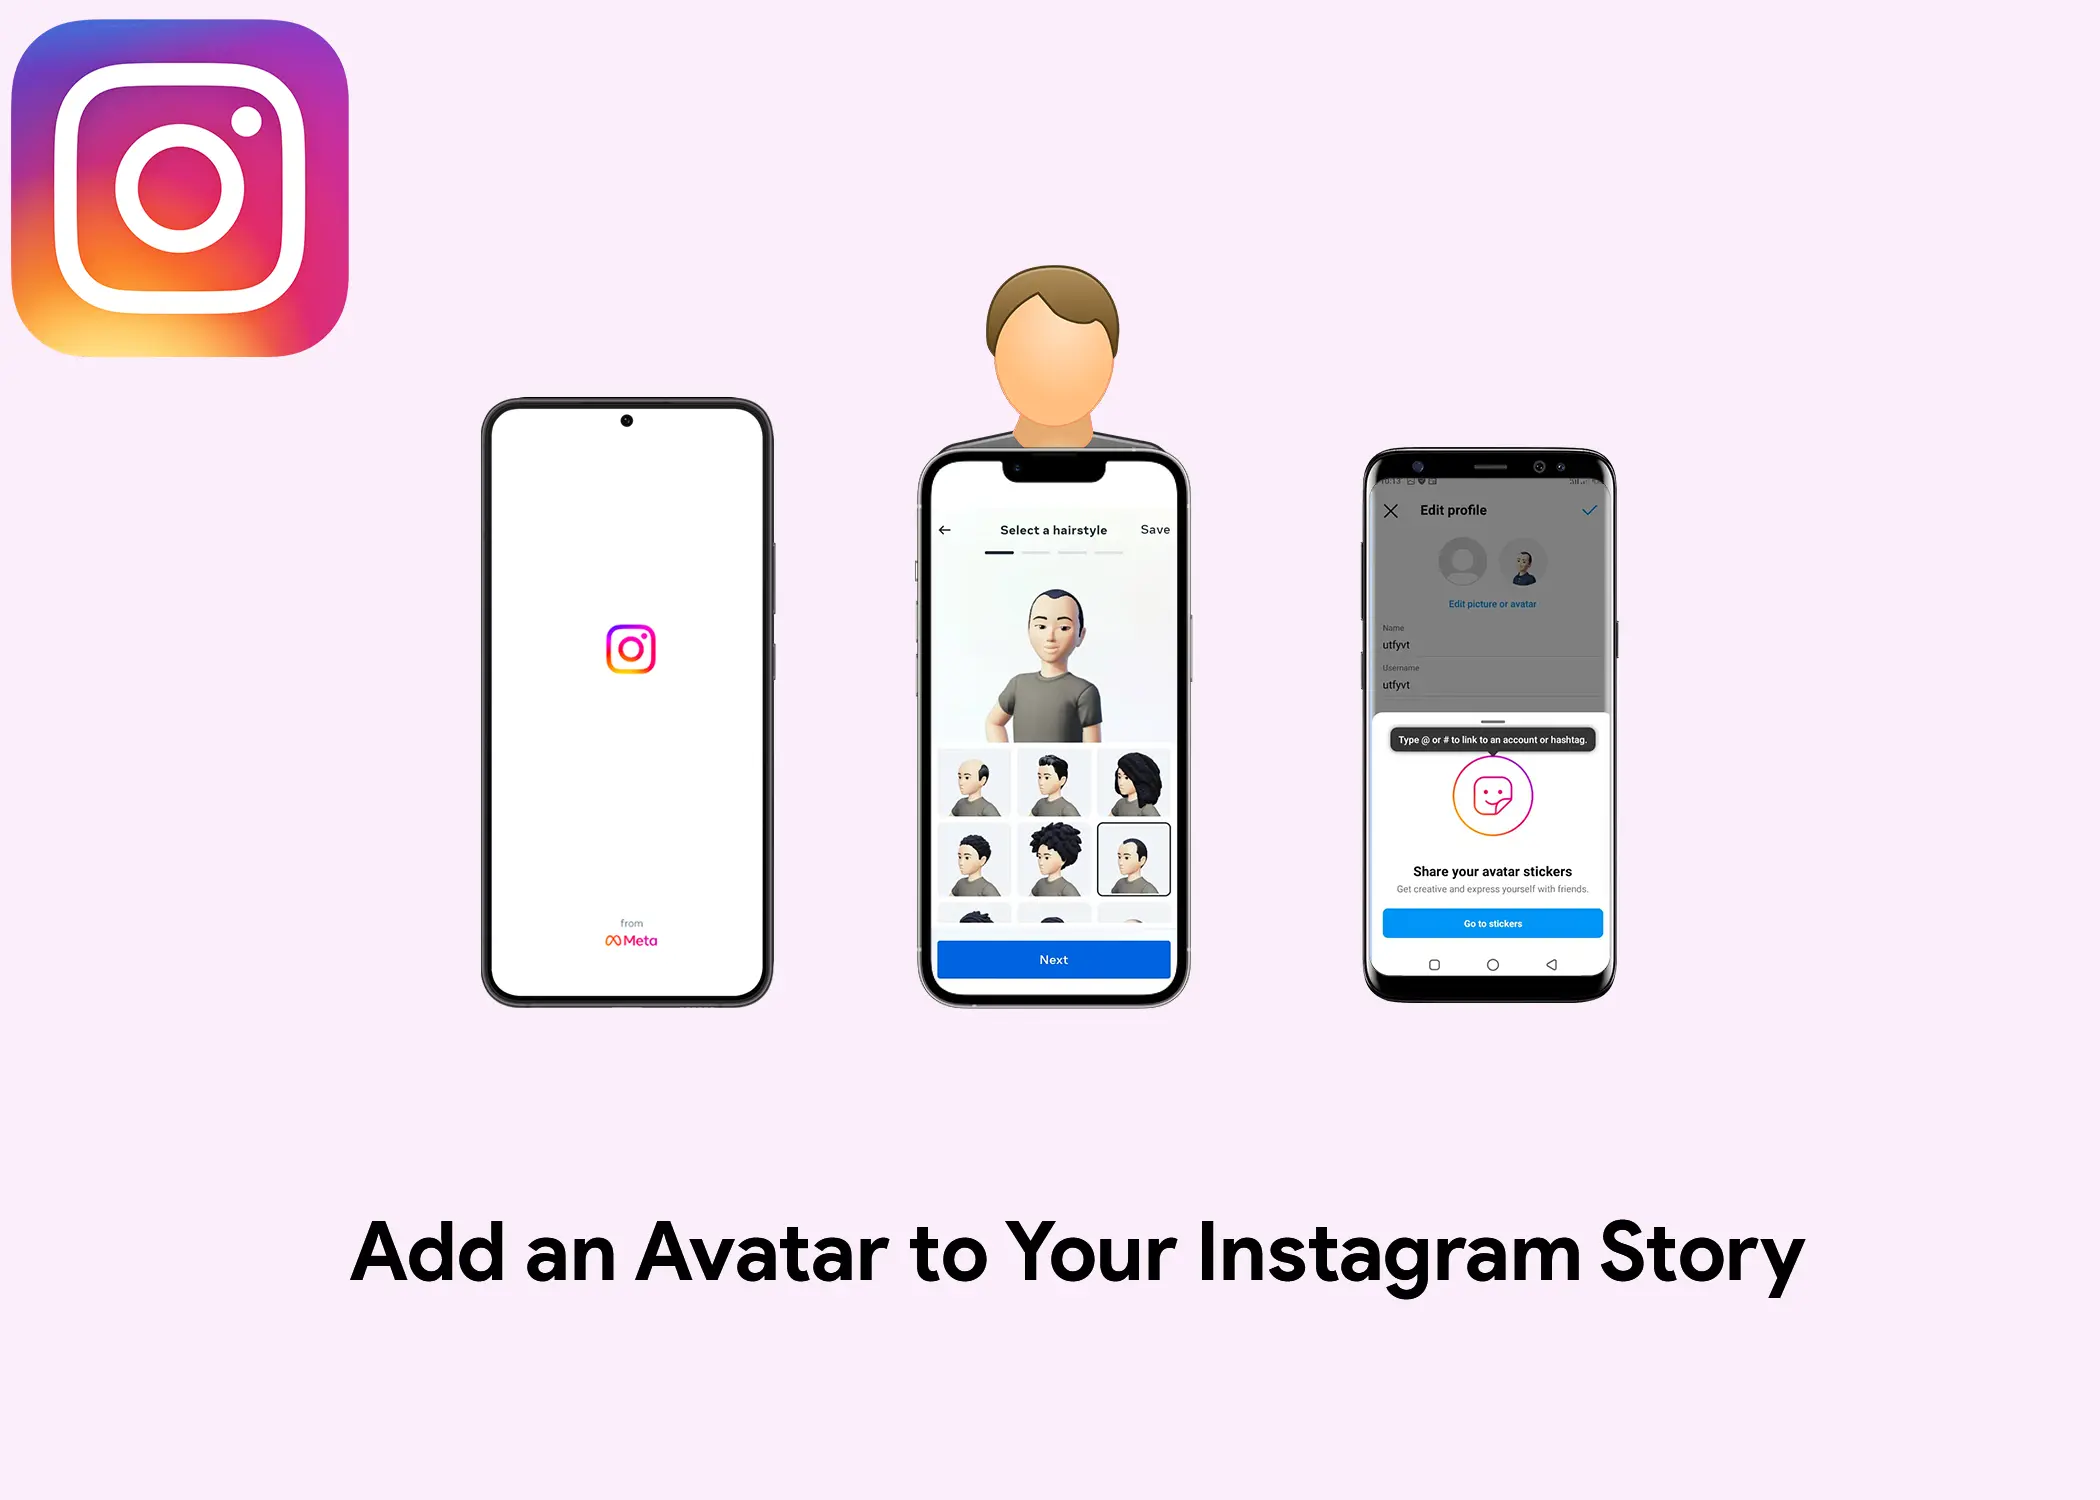 How to Add an Avatar to Your Instagram Story